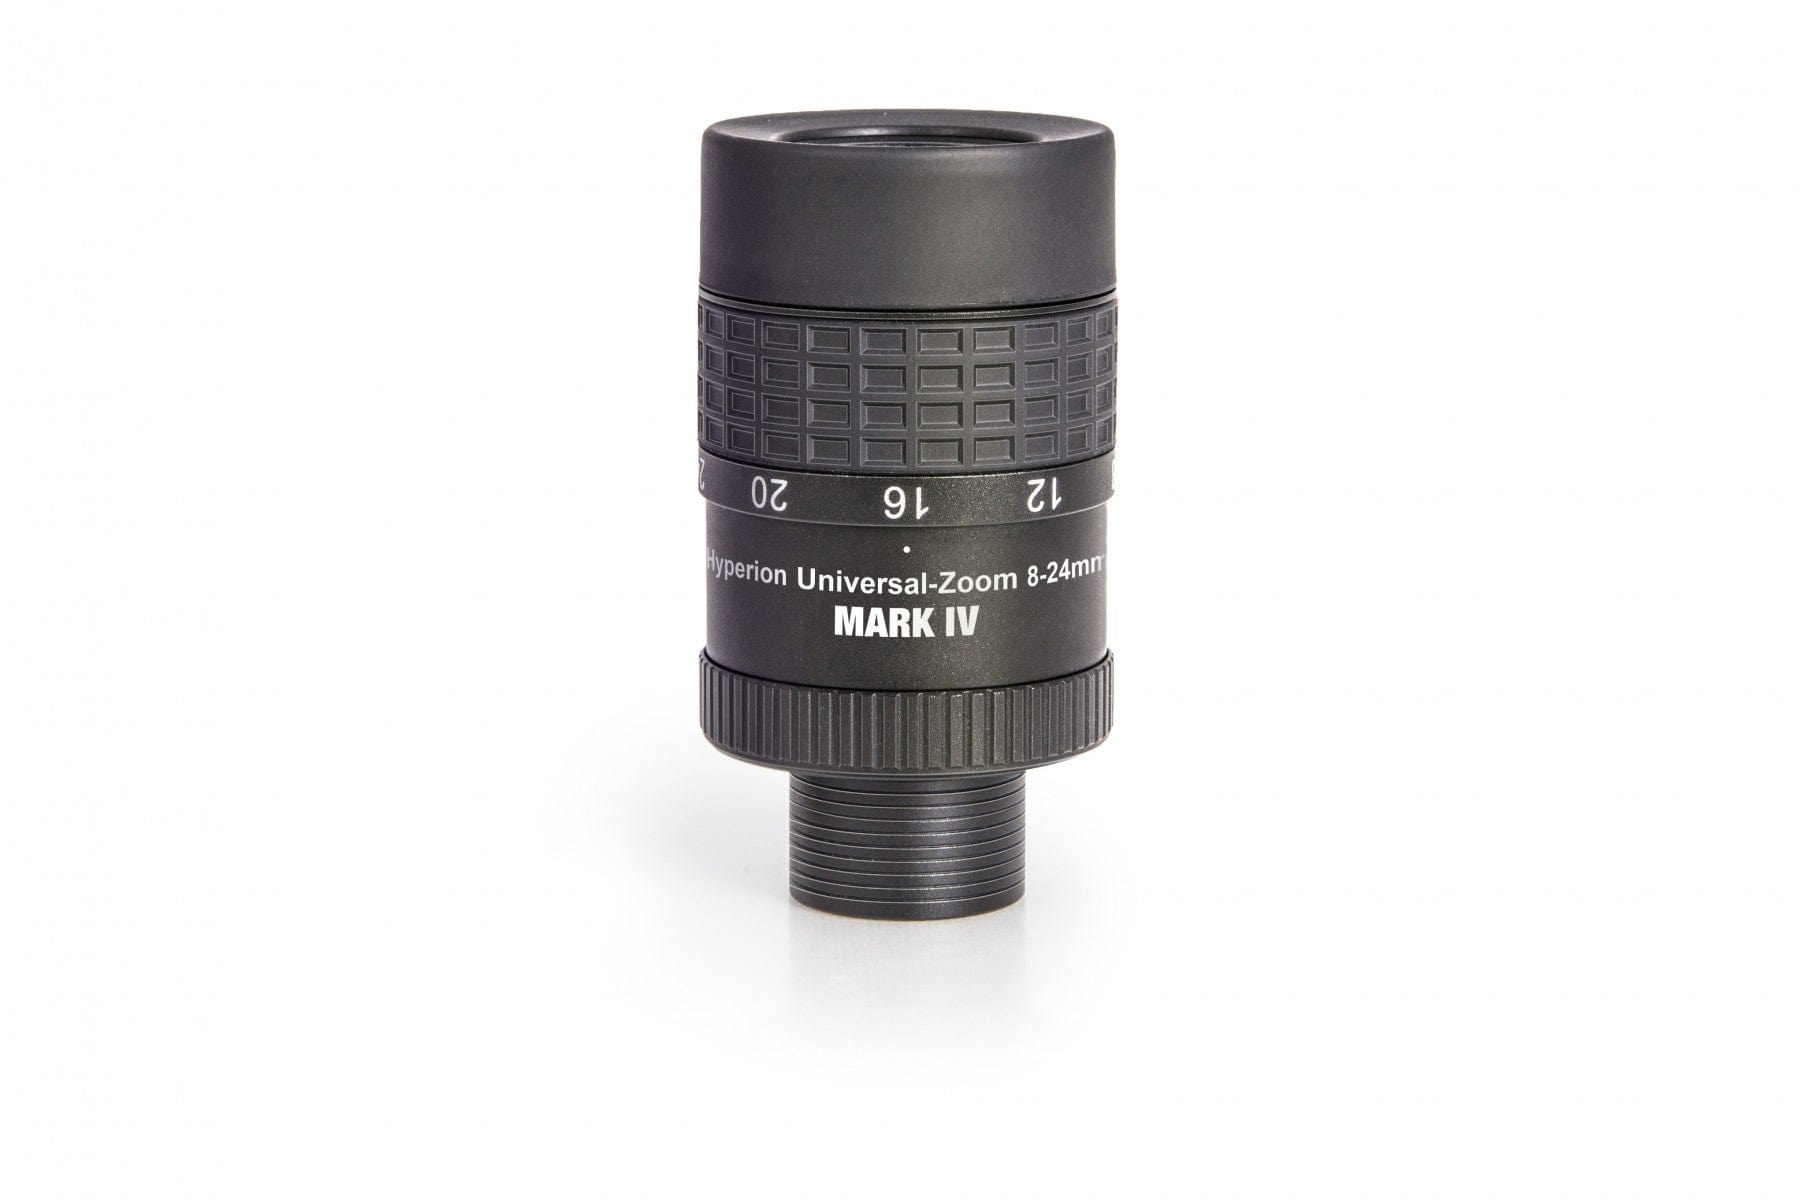 Baader Hyperion Universal Zoom Mark IV, 8-24mm eyepiece (1¼" and 2")